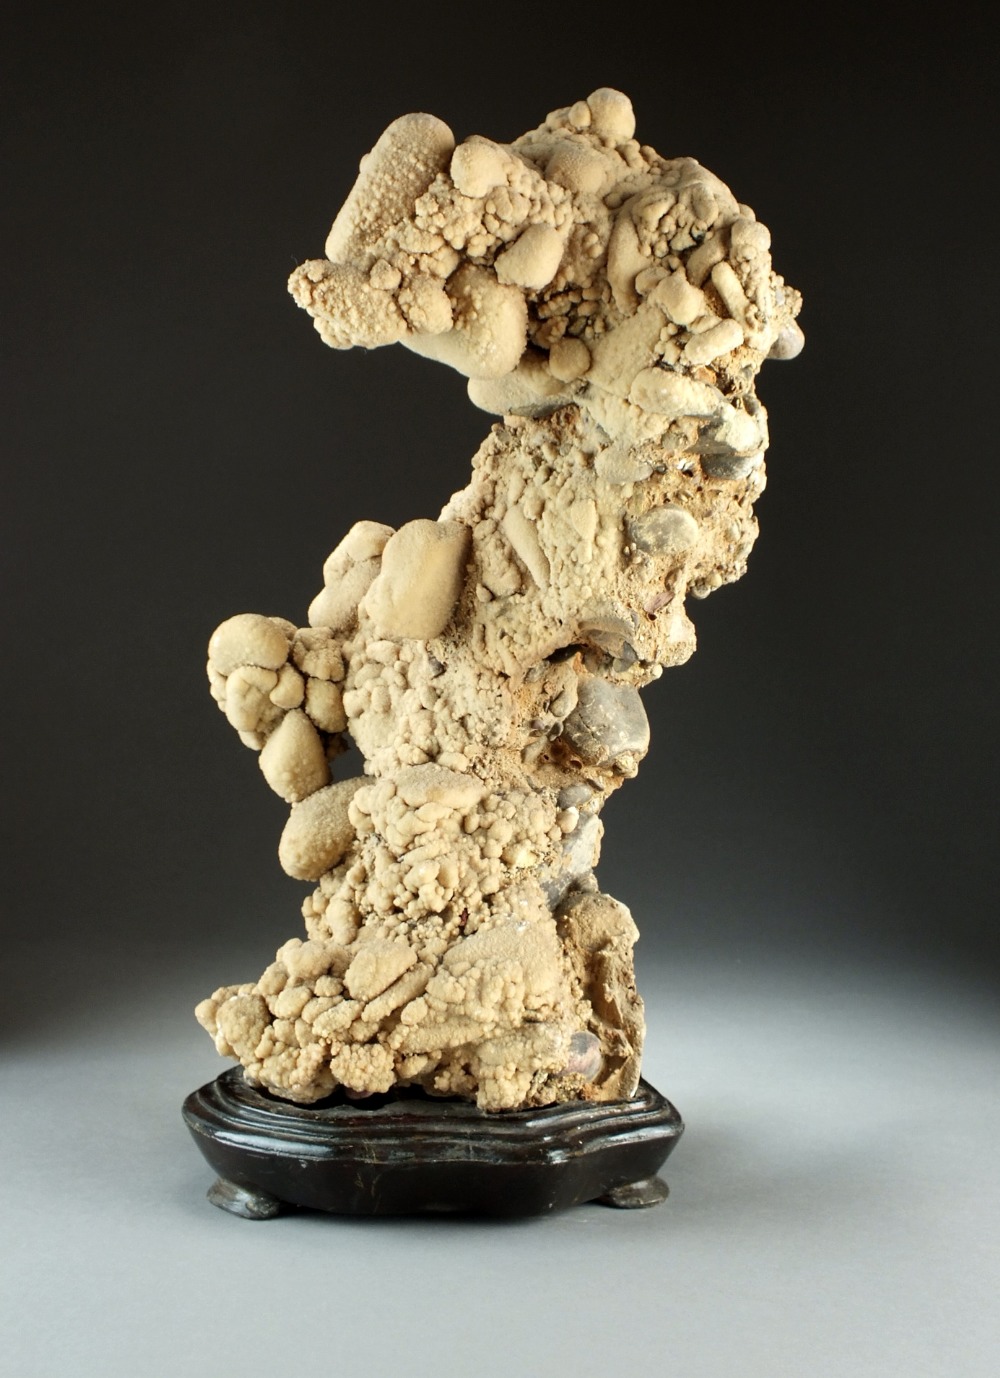 A large scholar's rock on stand, the pale orange stone probably aragonite with basalt inclusions,